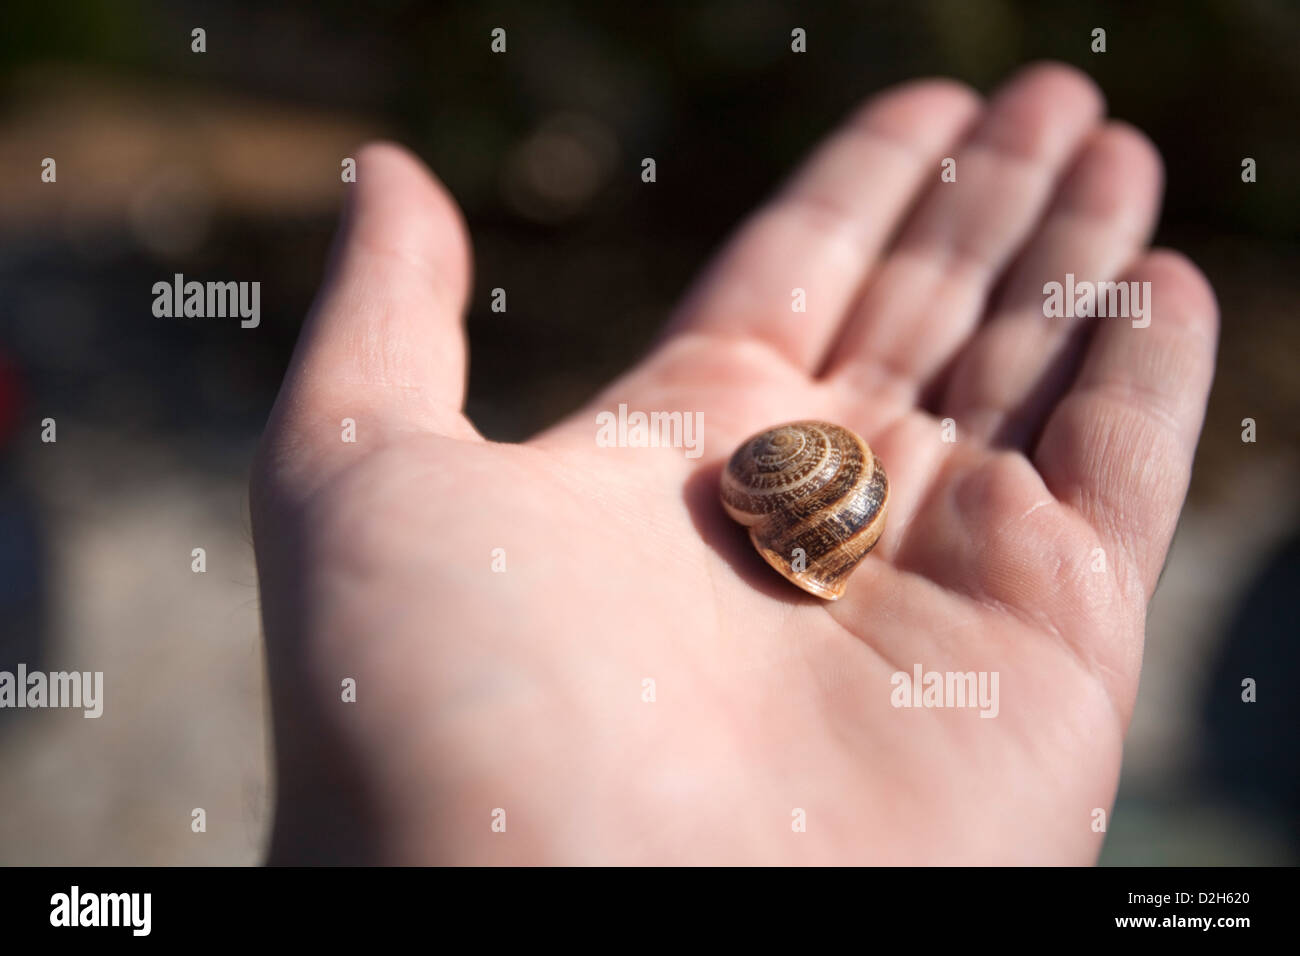 Faro, Portugal, a snail in a Maennerhand Stock Photo